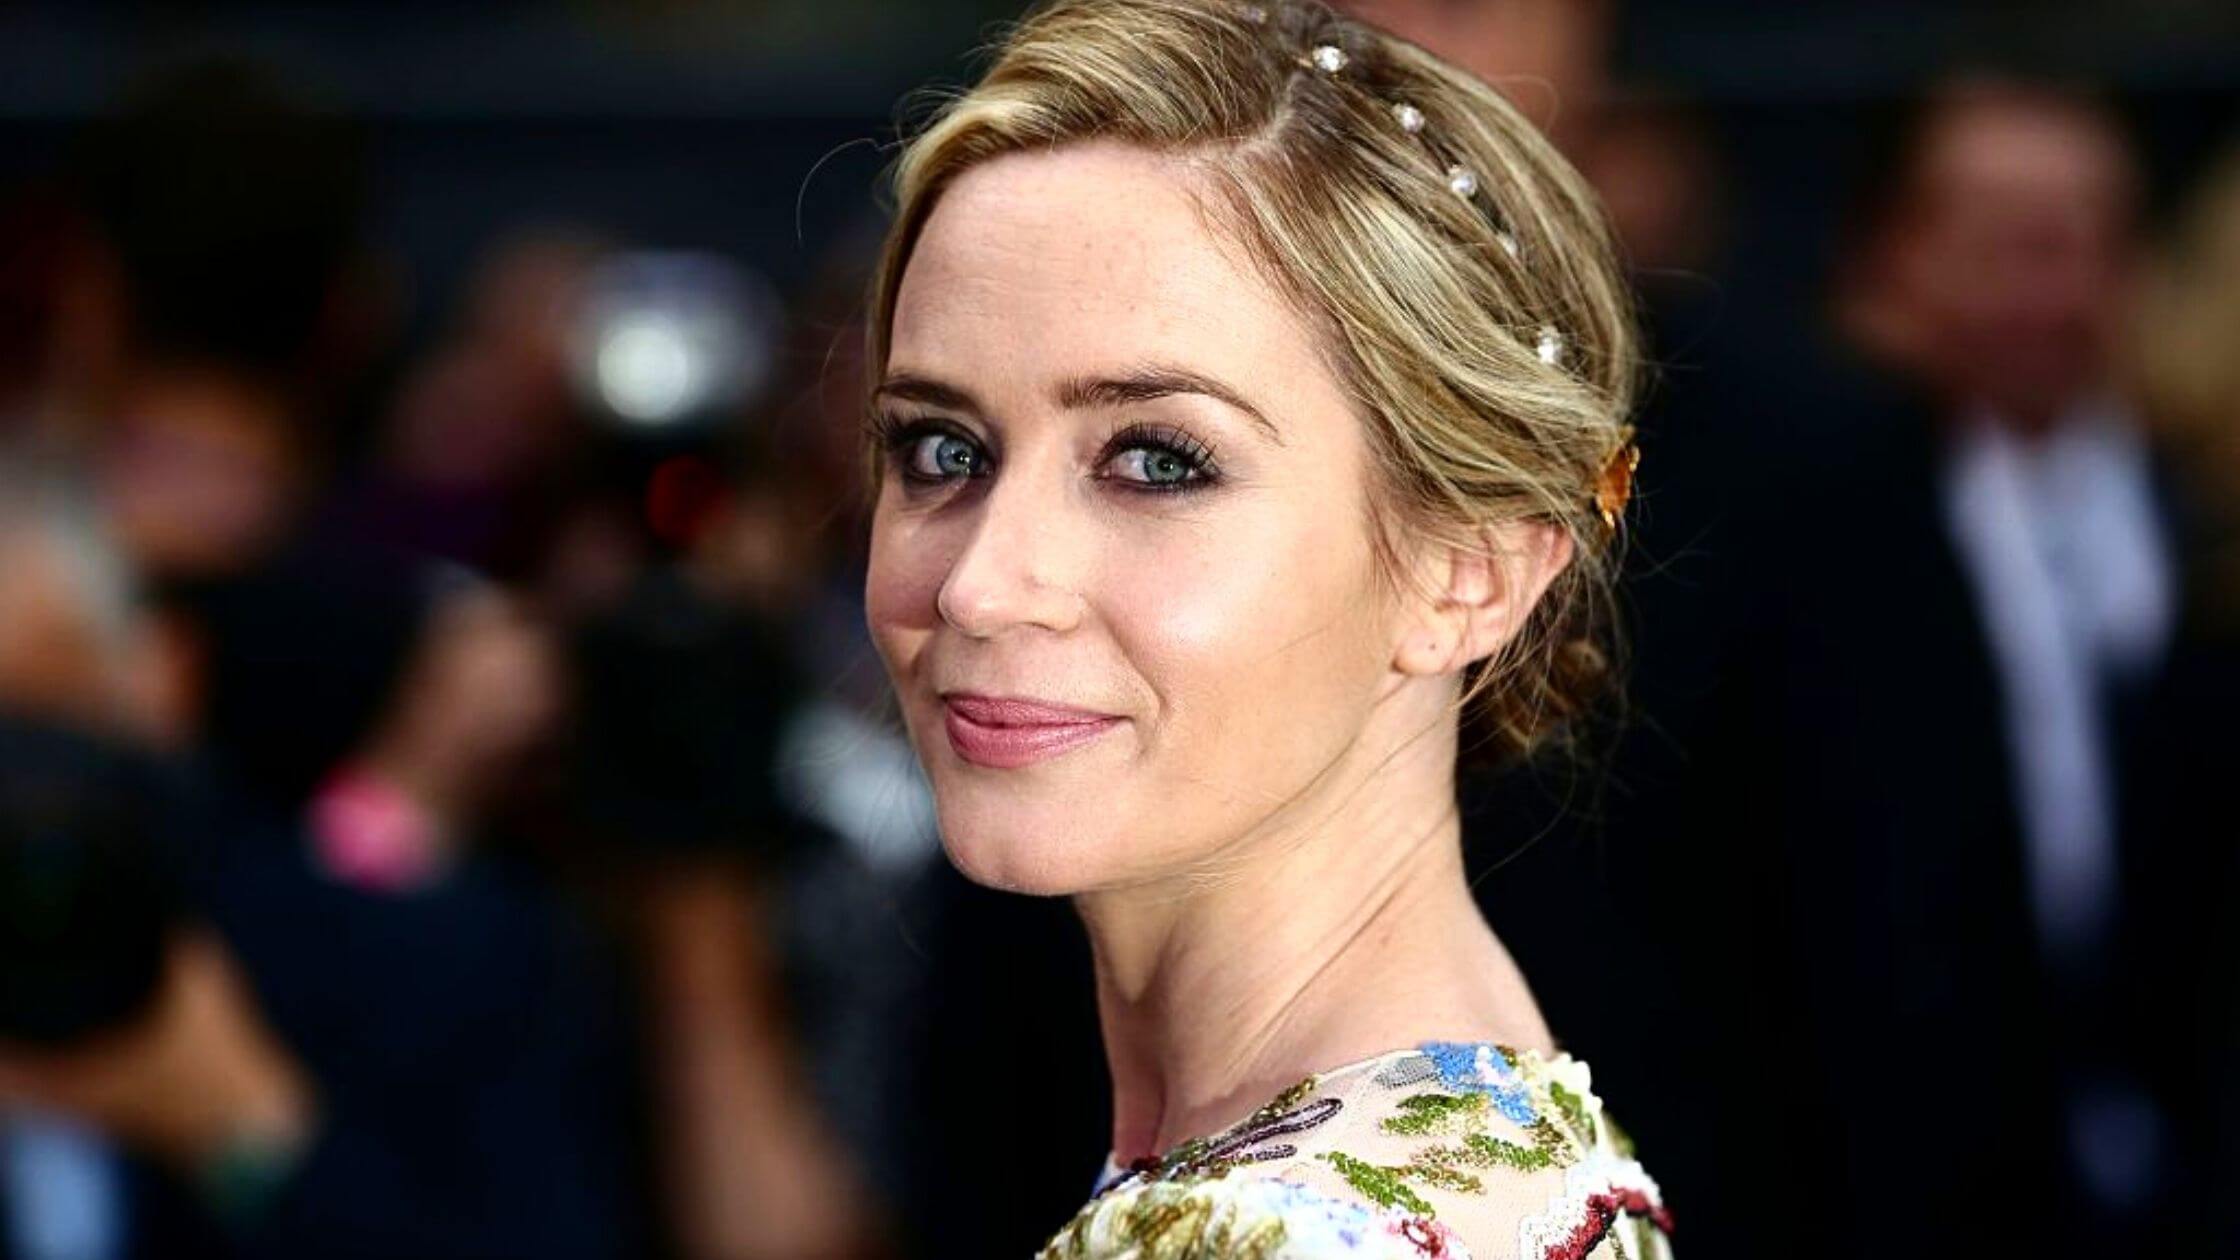 Emily Blunt's Age, Height, Husband, Kids, And Net Worth